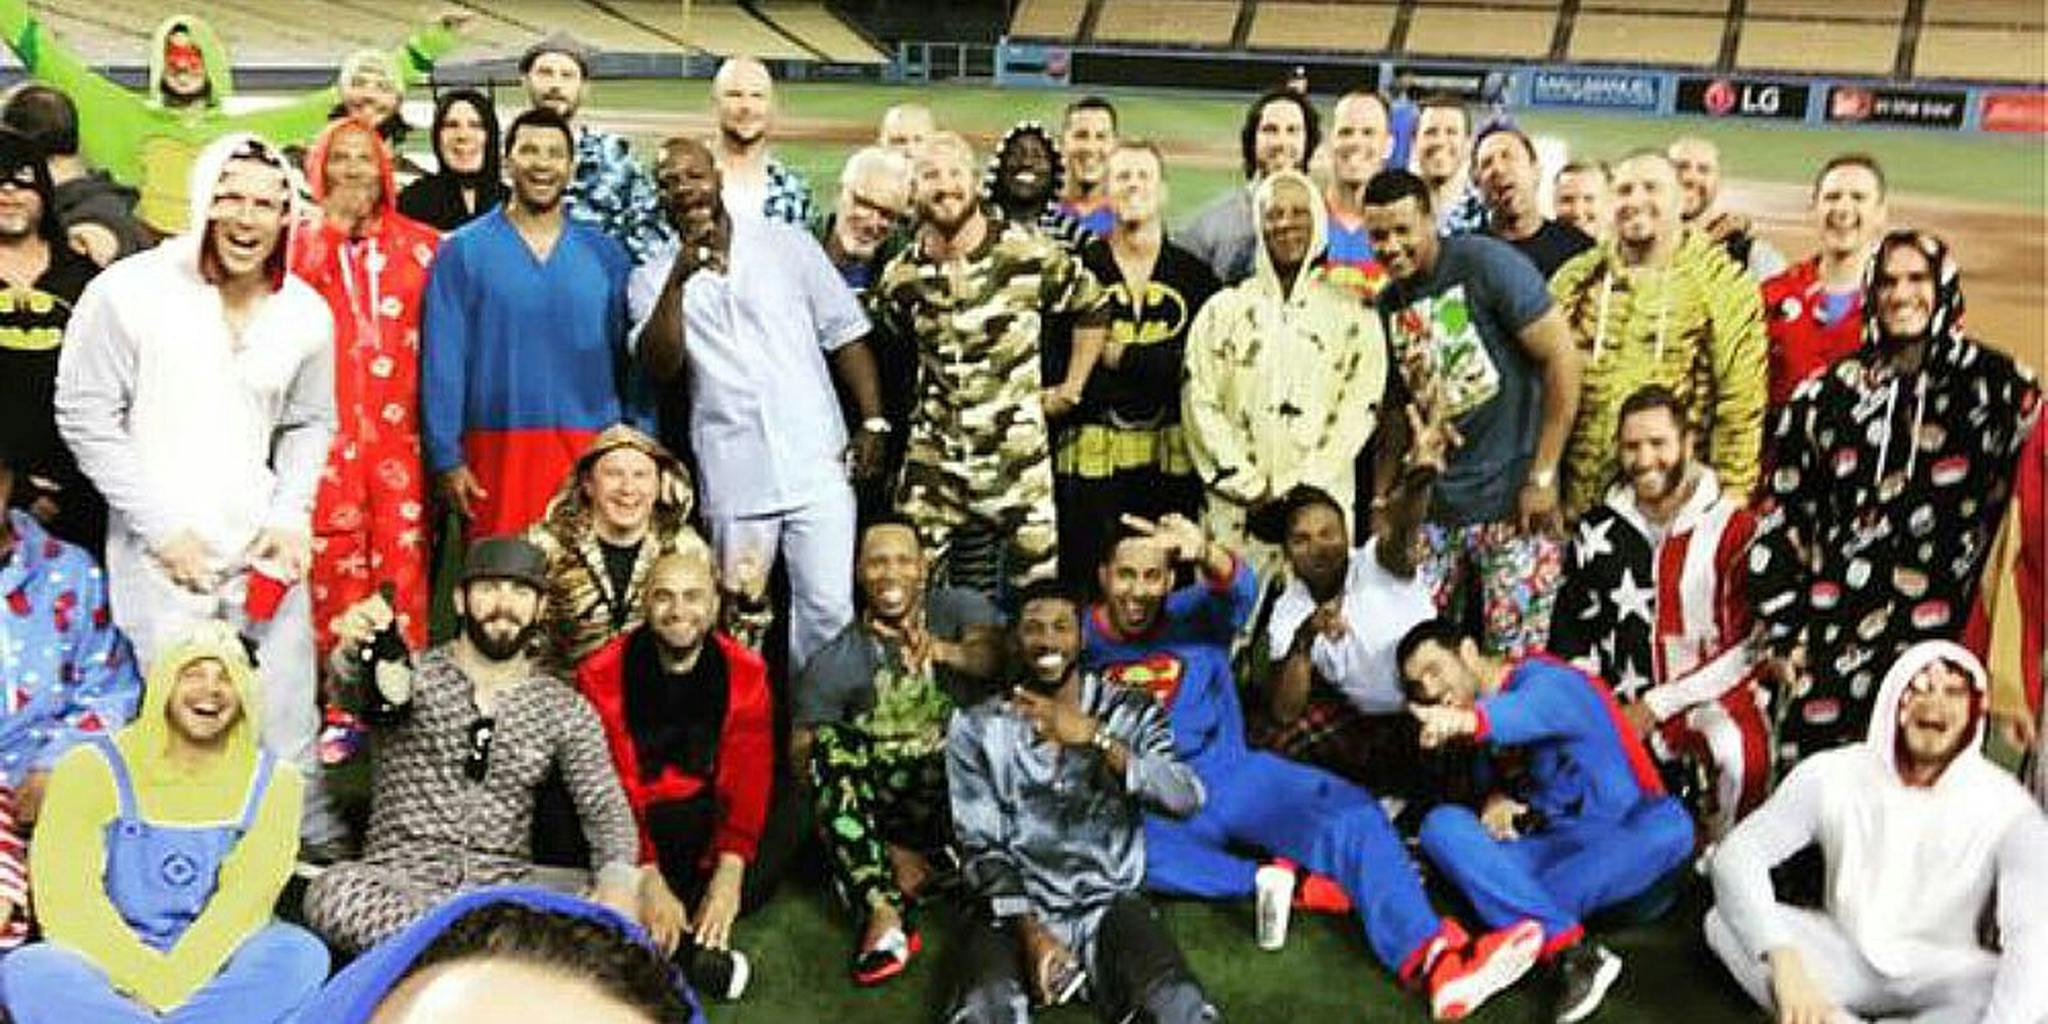 Jake Arrieta celebrates no-hitter by flying home in pajamas – The Mercury  News